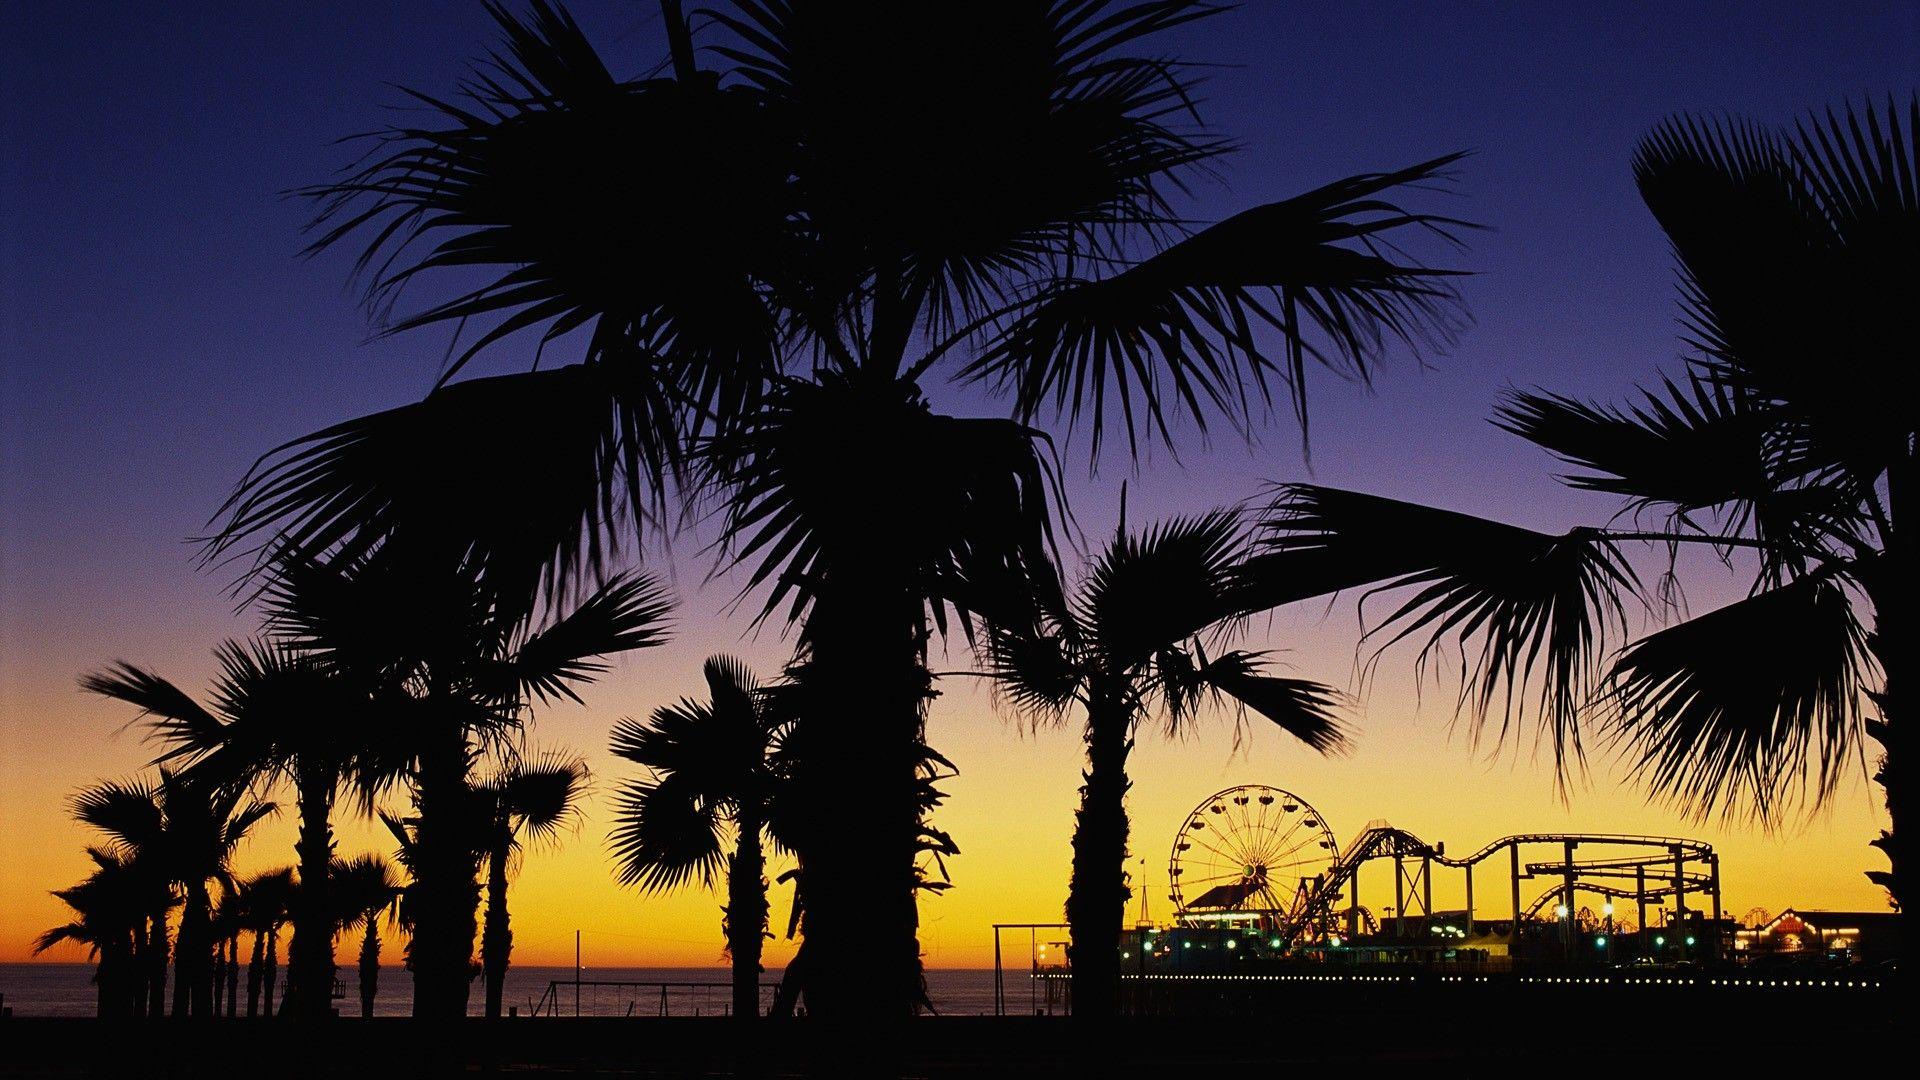 California Wallpaper Android Apps on Google Play 1920×1080